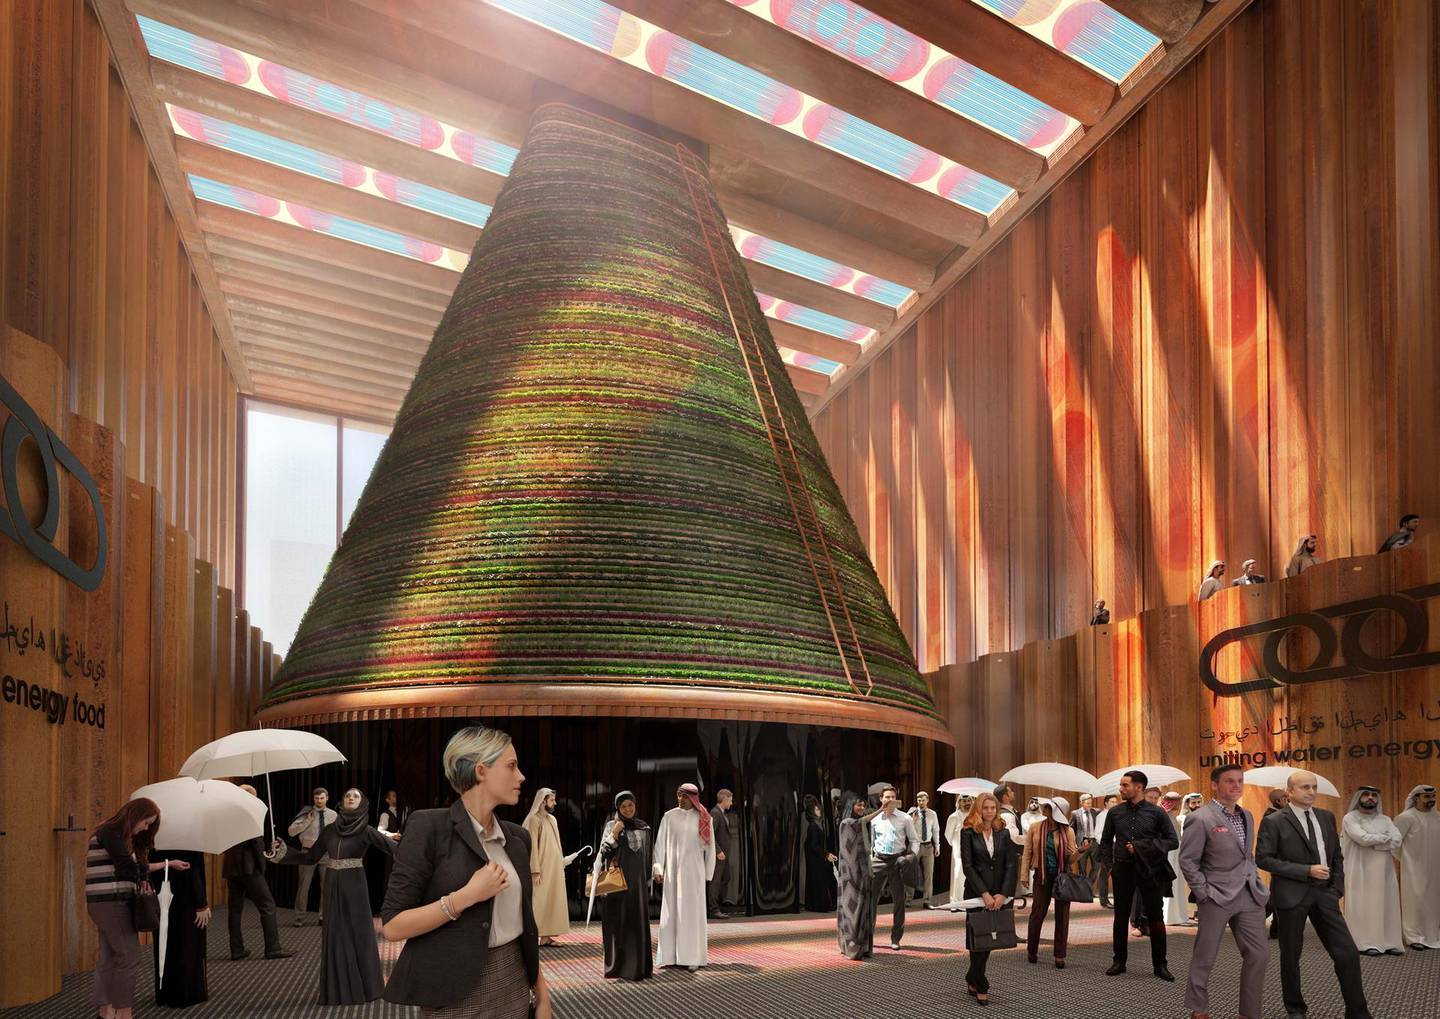 FOR RAMOLA'S STORY ON NETHERLANDS EXPO PAVILION. The Netherlands pavilion will harvest water, energy and food in a cone-shaped vertical farm. Courtesy: V8 Architects